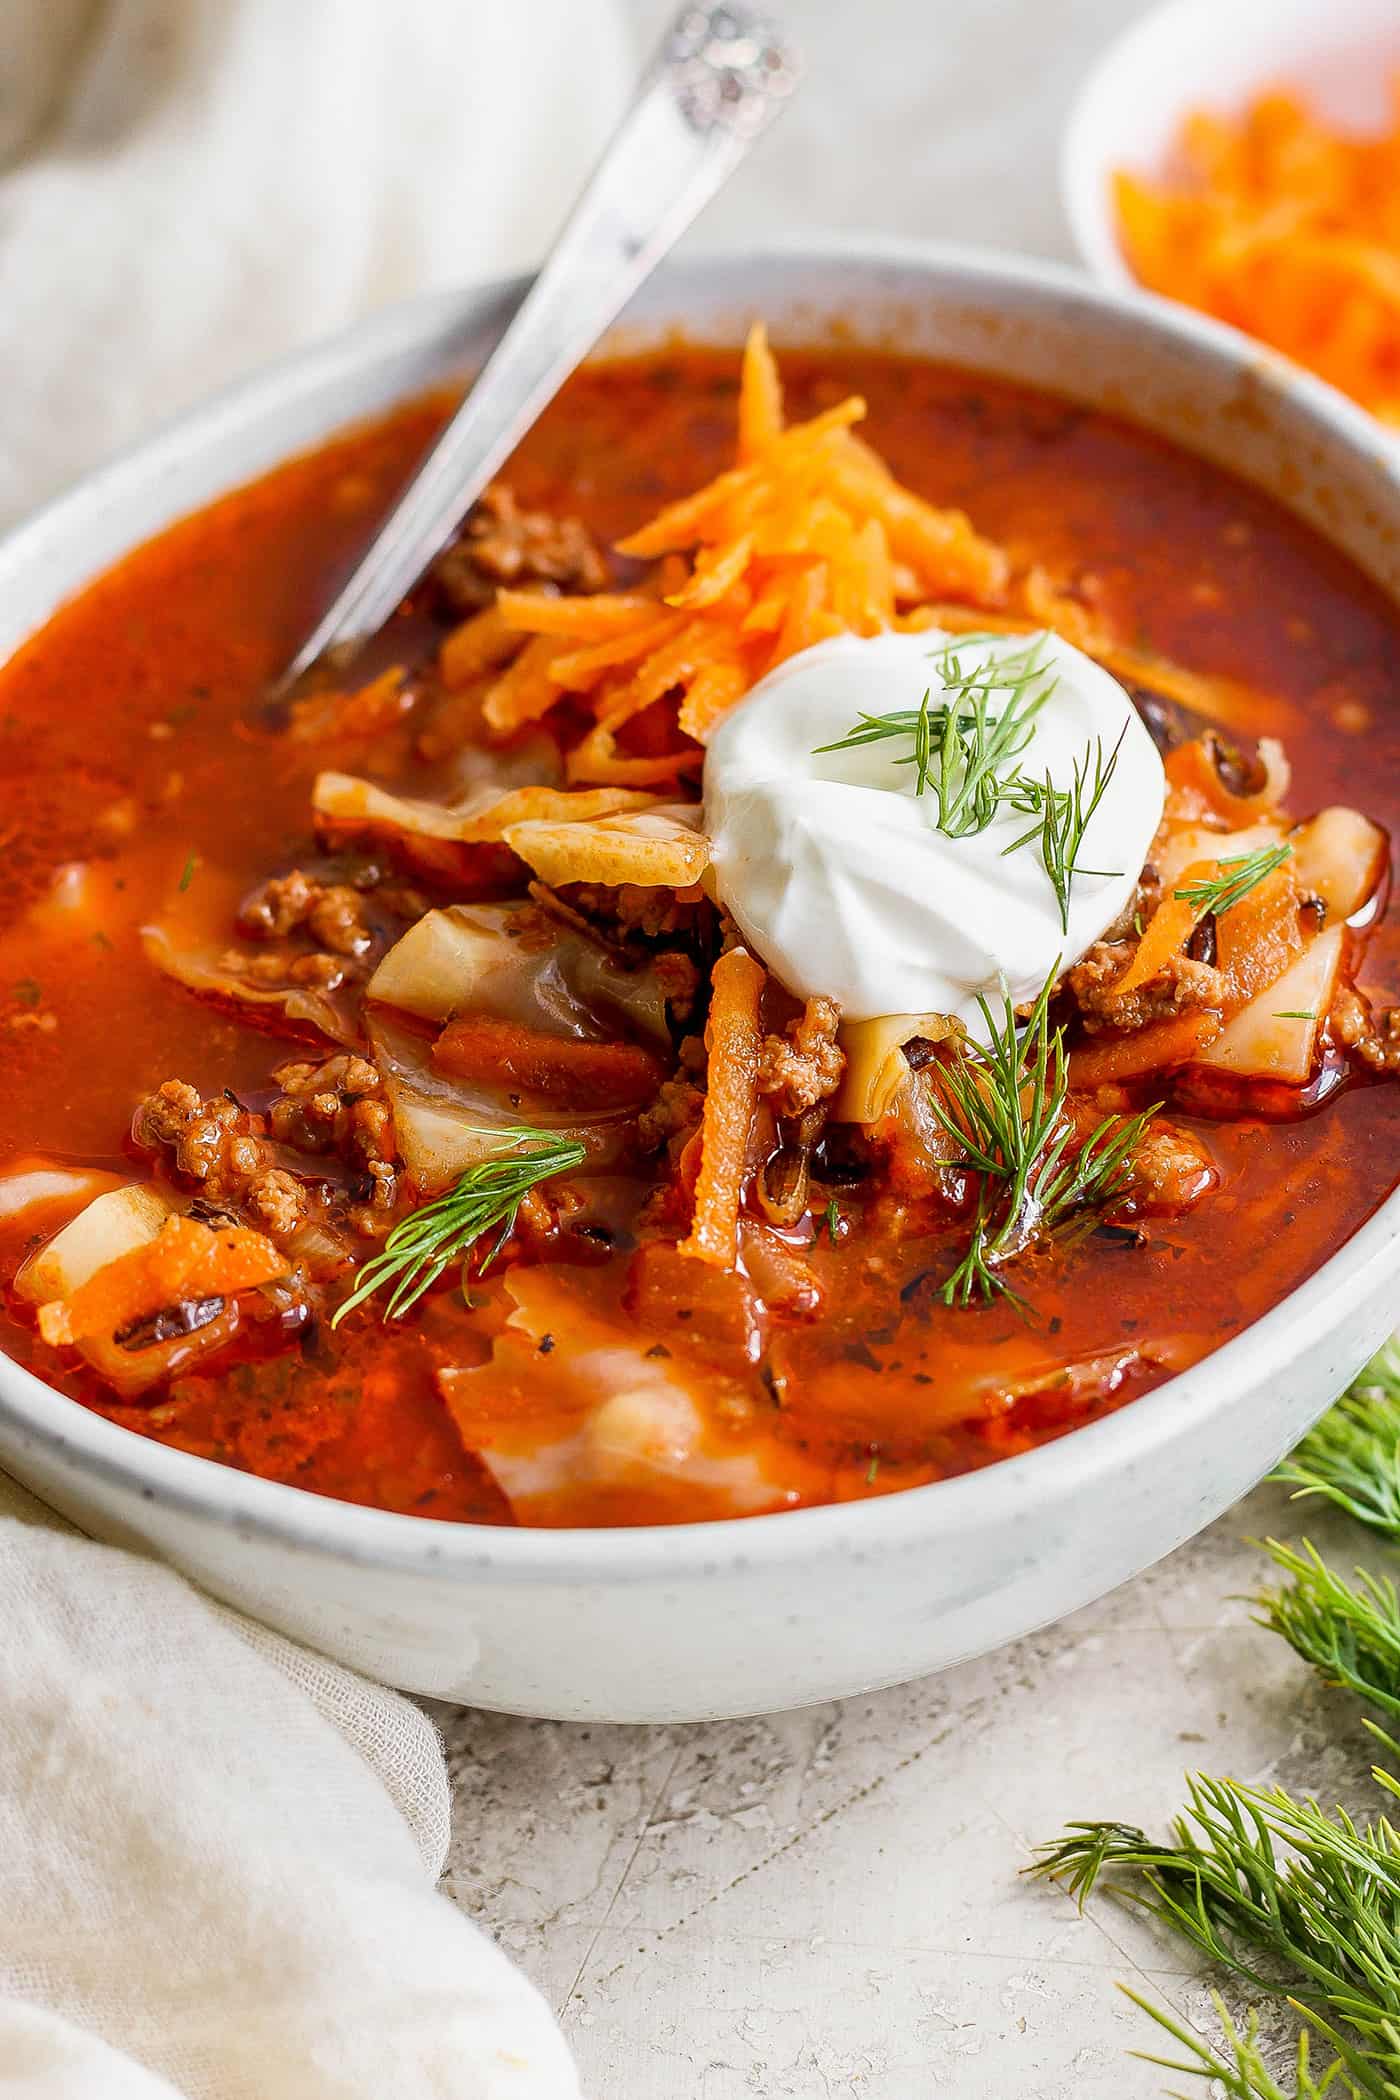 A bowl of unstuffed cabbage roll soup topped with carrot garnish and sour cream.